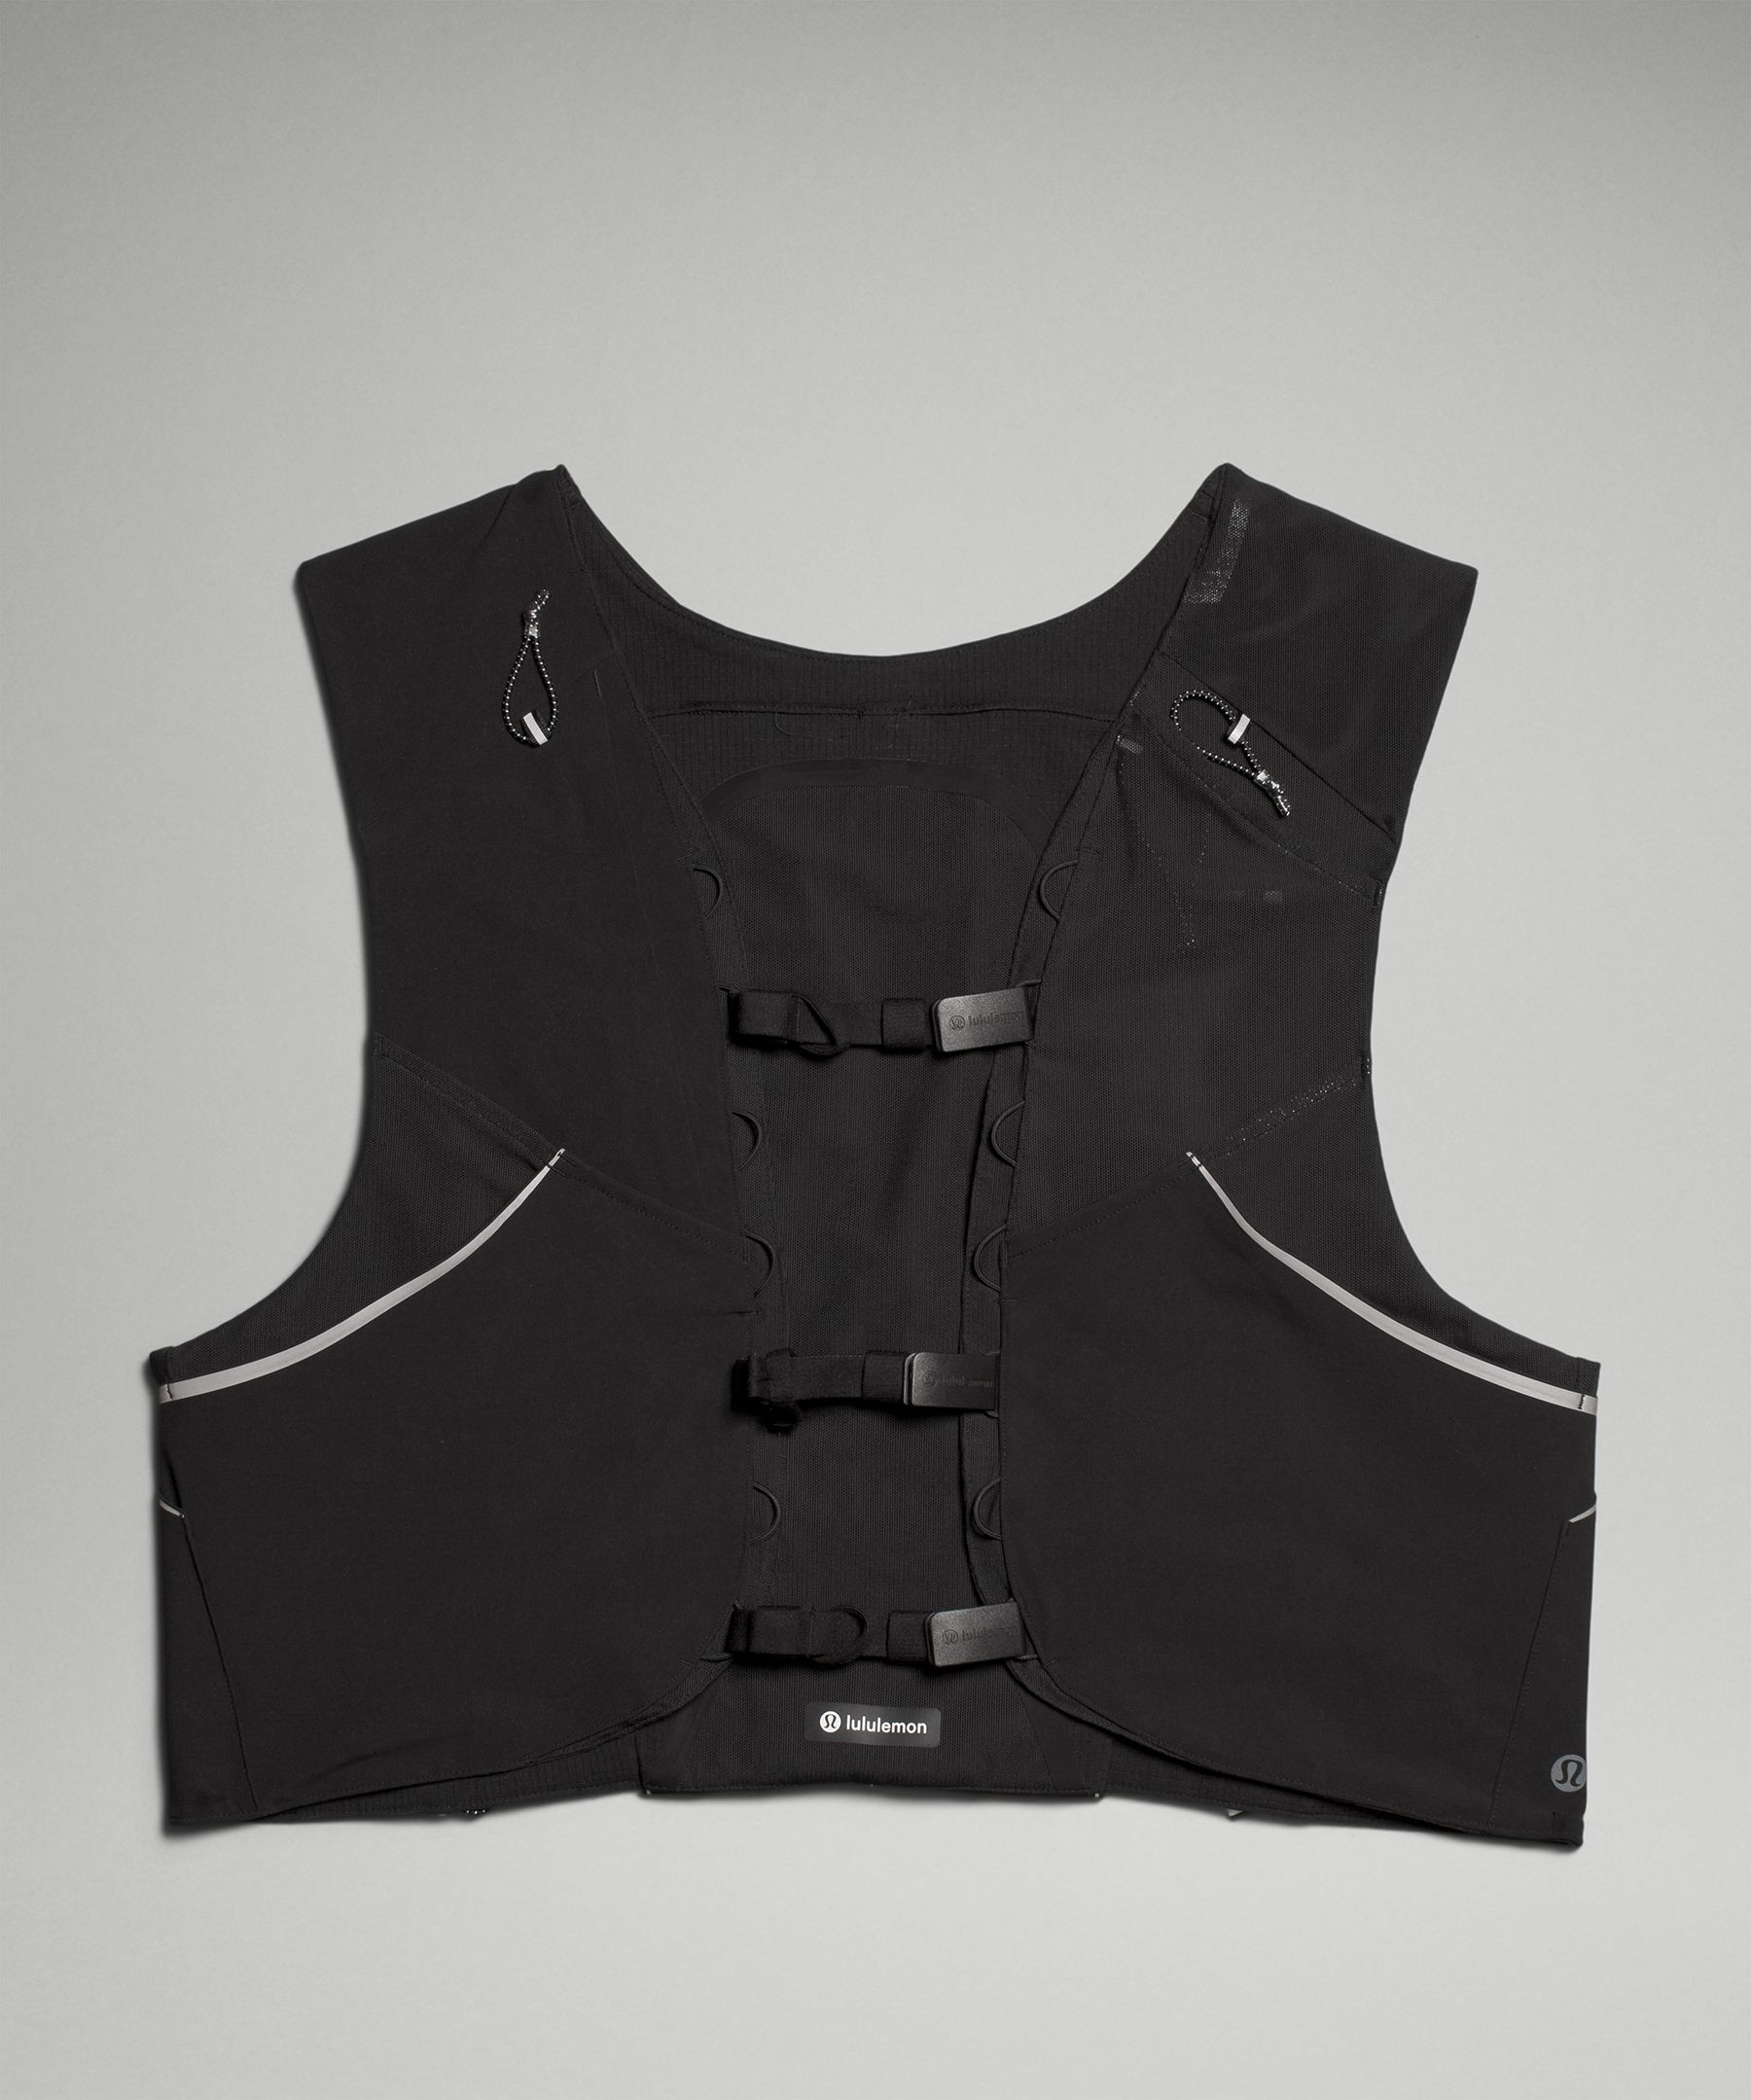 Fast and Free Trail Running Vest, Equipment